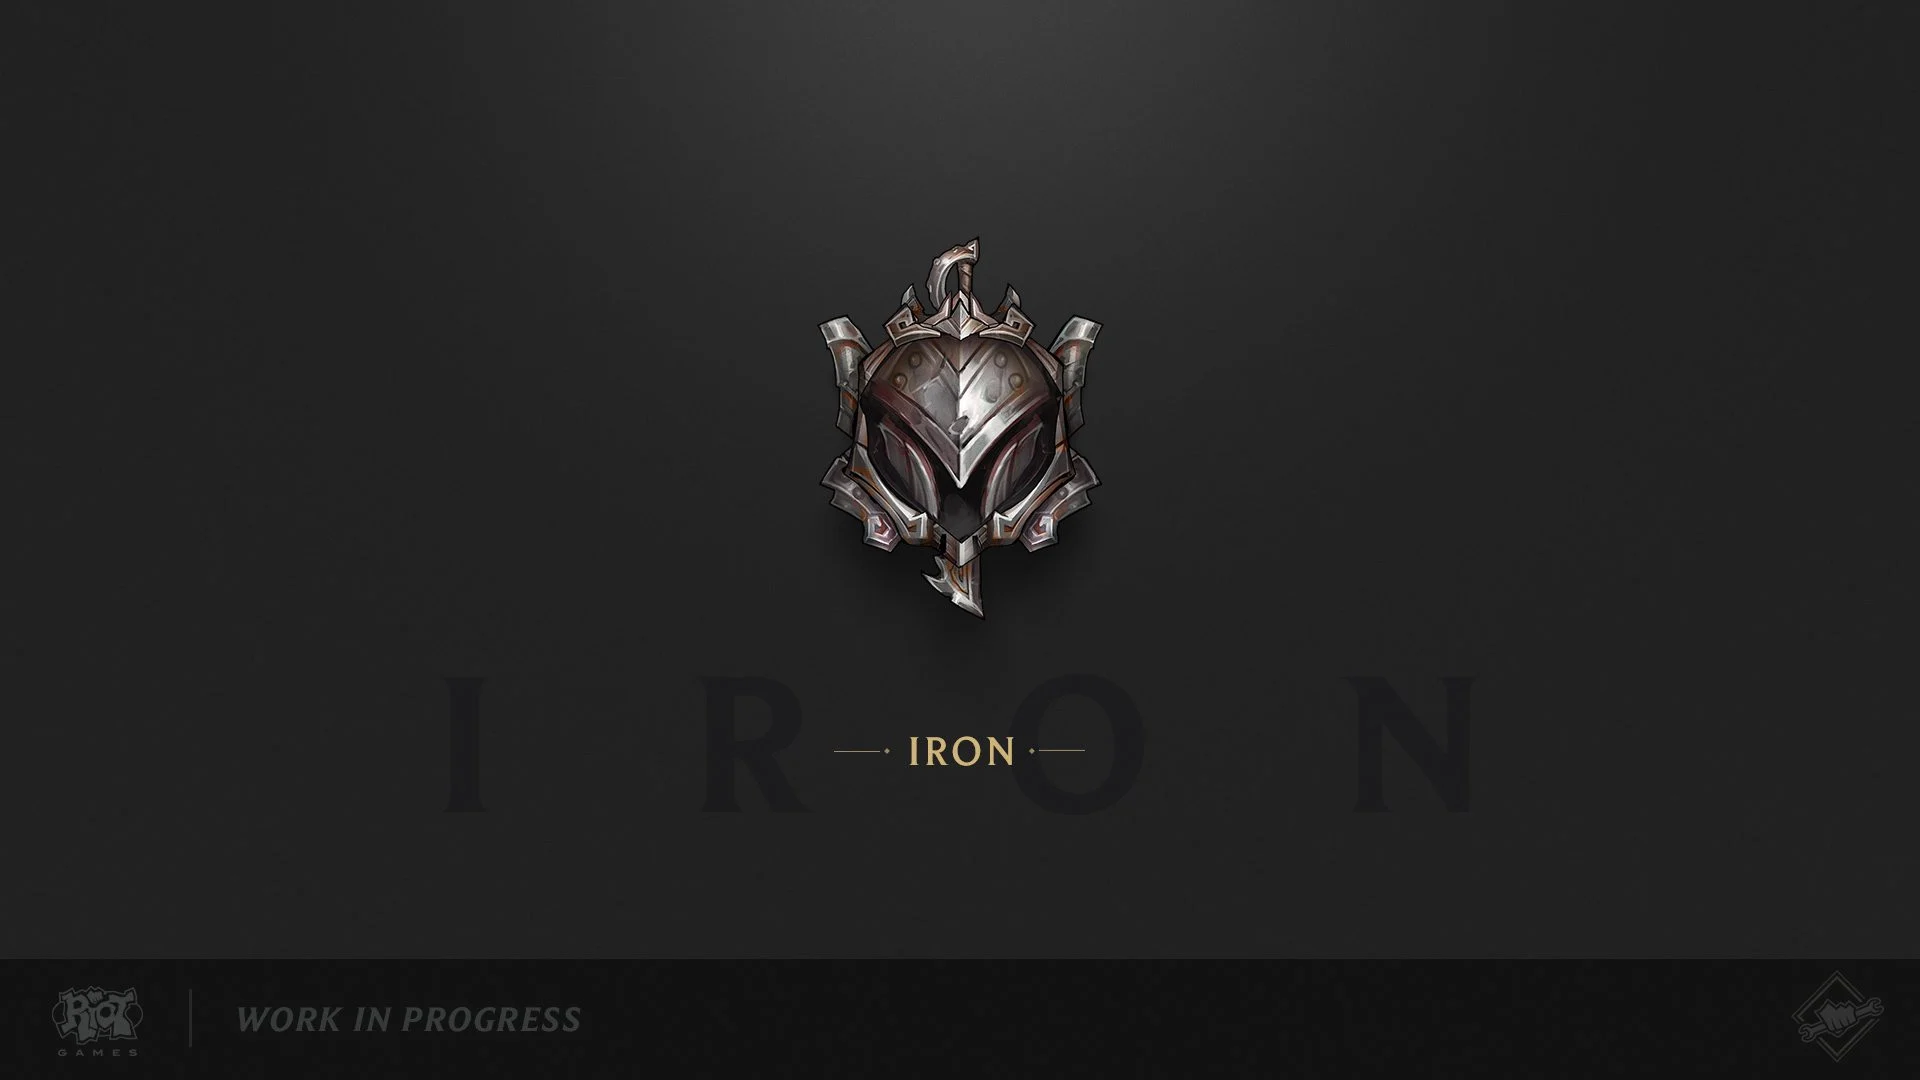 NA [UNK] Iron IV [UNK] Hand De-ranked [UNK] Full Access + Unverified [UNK] High Noon Ashe + 36K BE